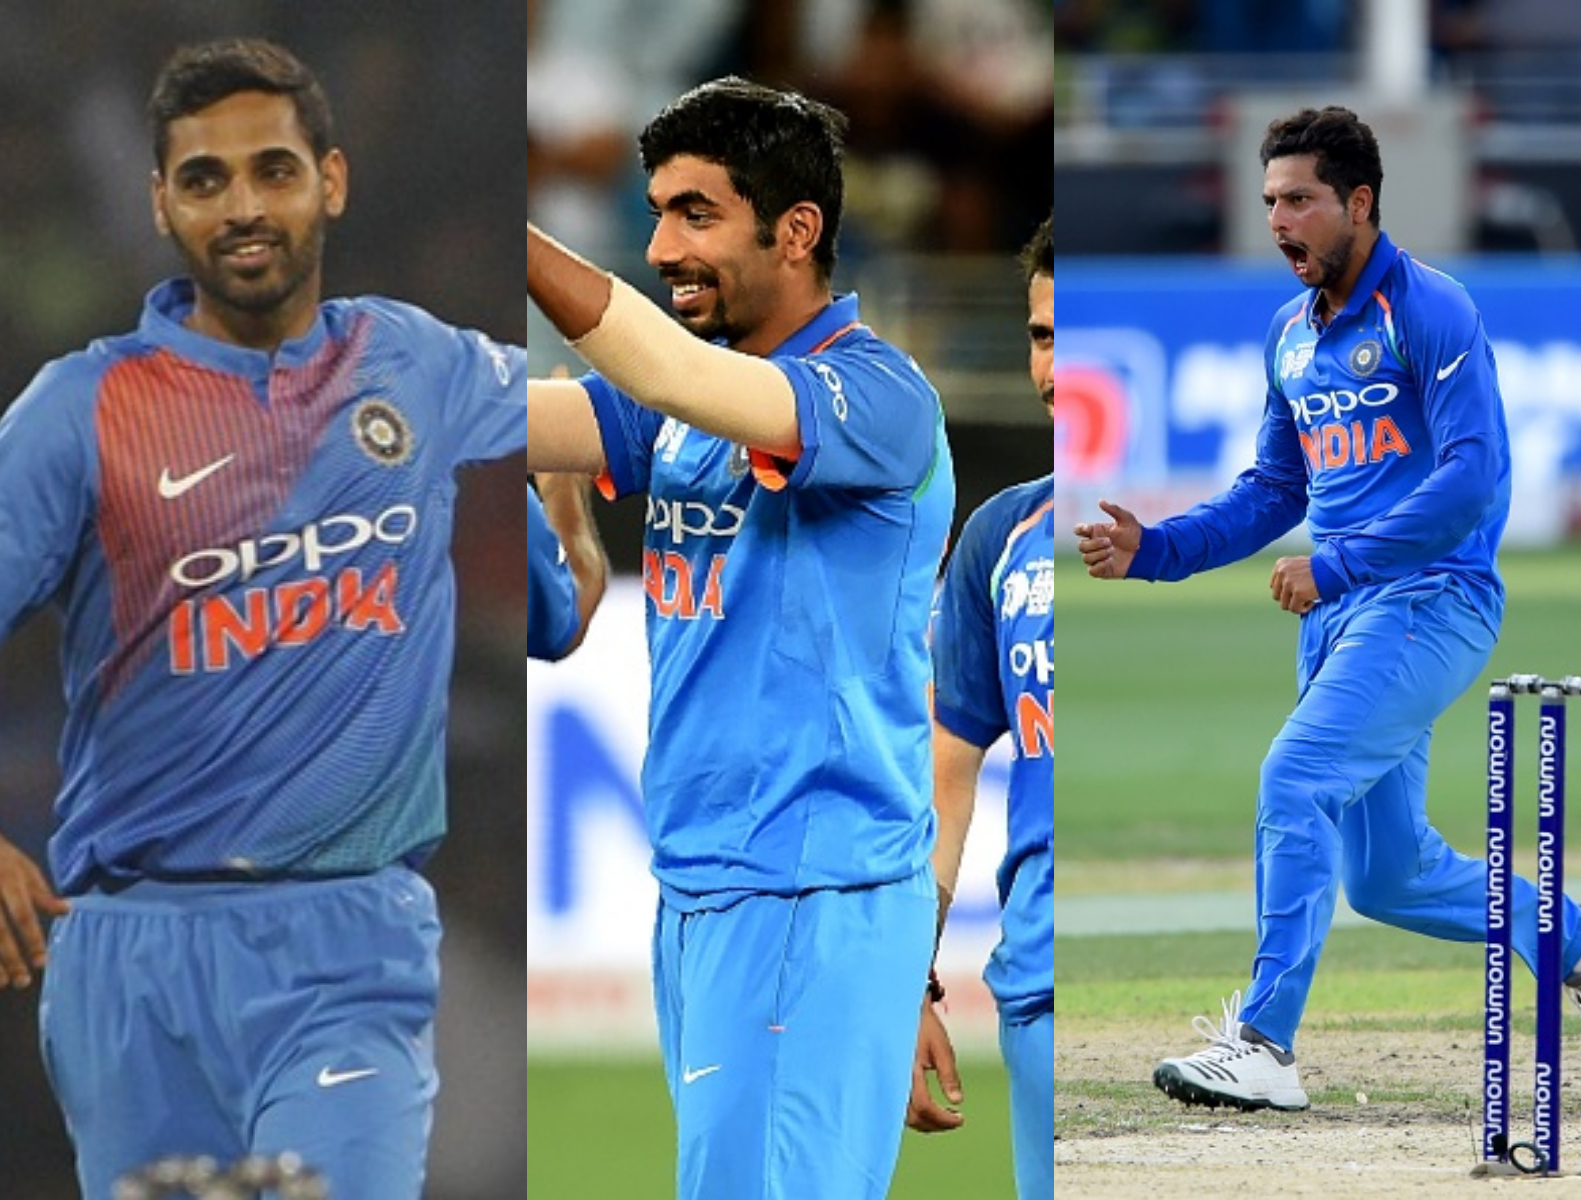 The bowling trio of Bhuvneshwar, Bumrah and Kuldeep are the ebst in T20 cricket right now